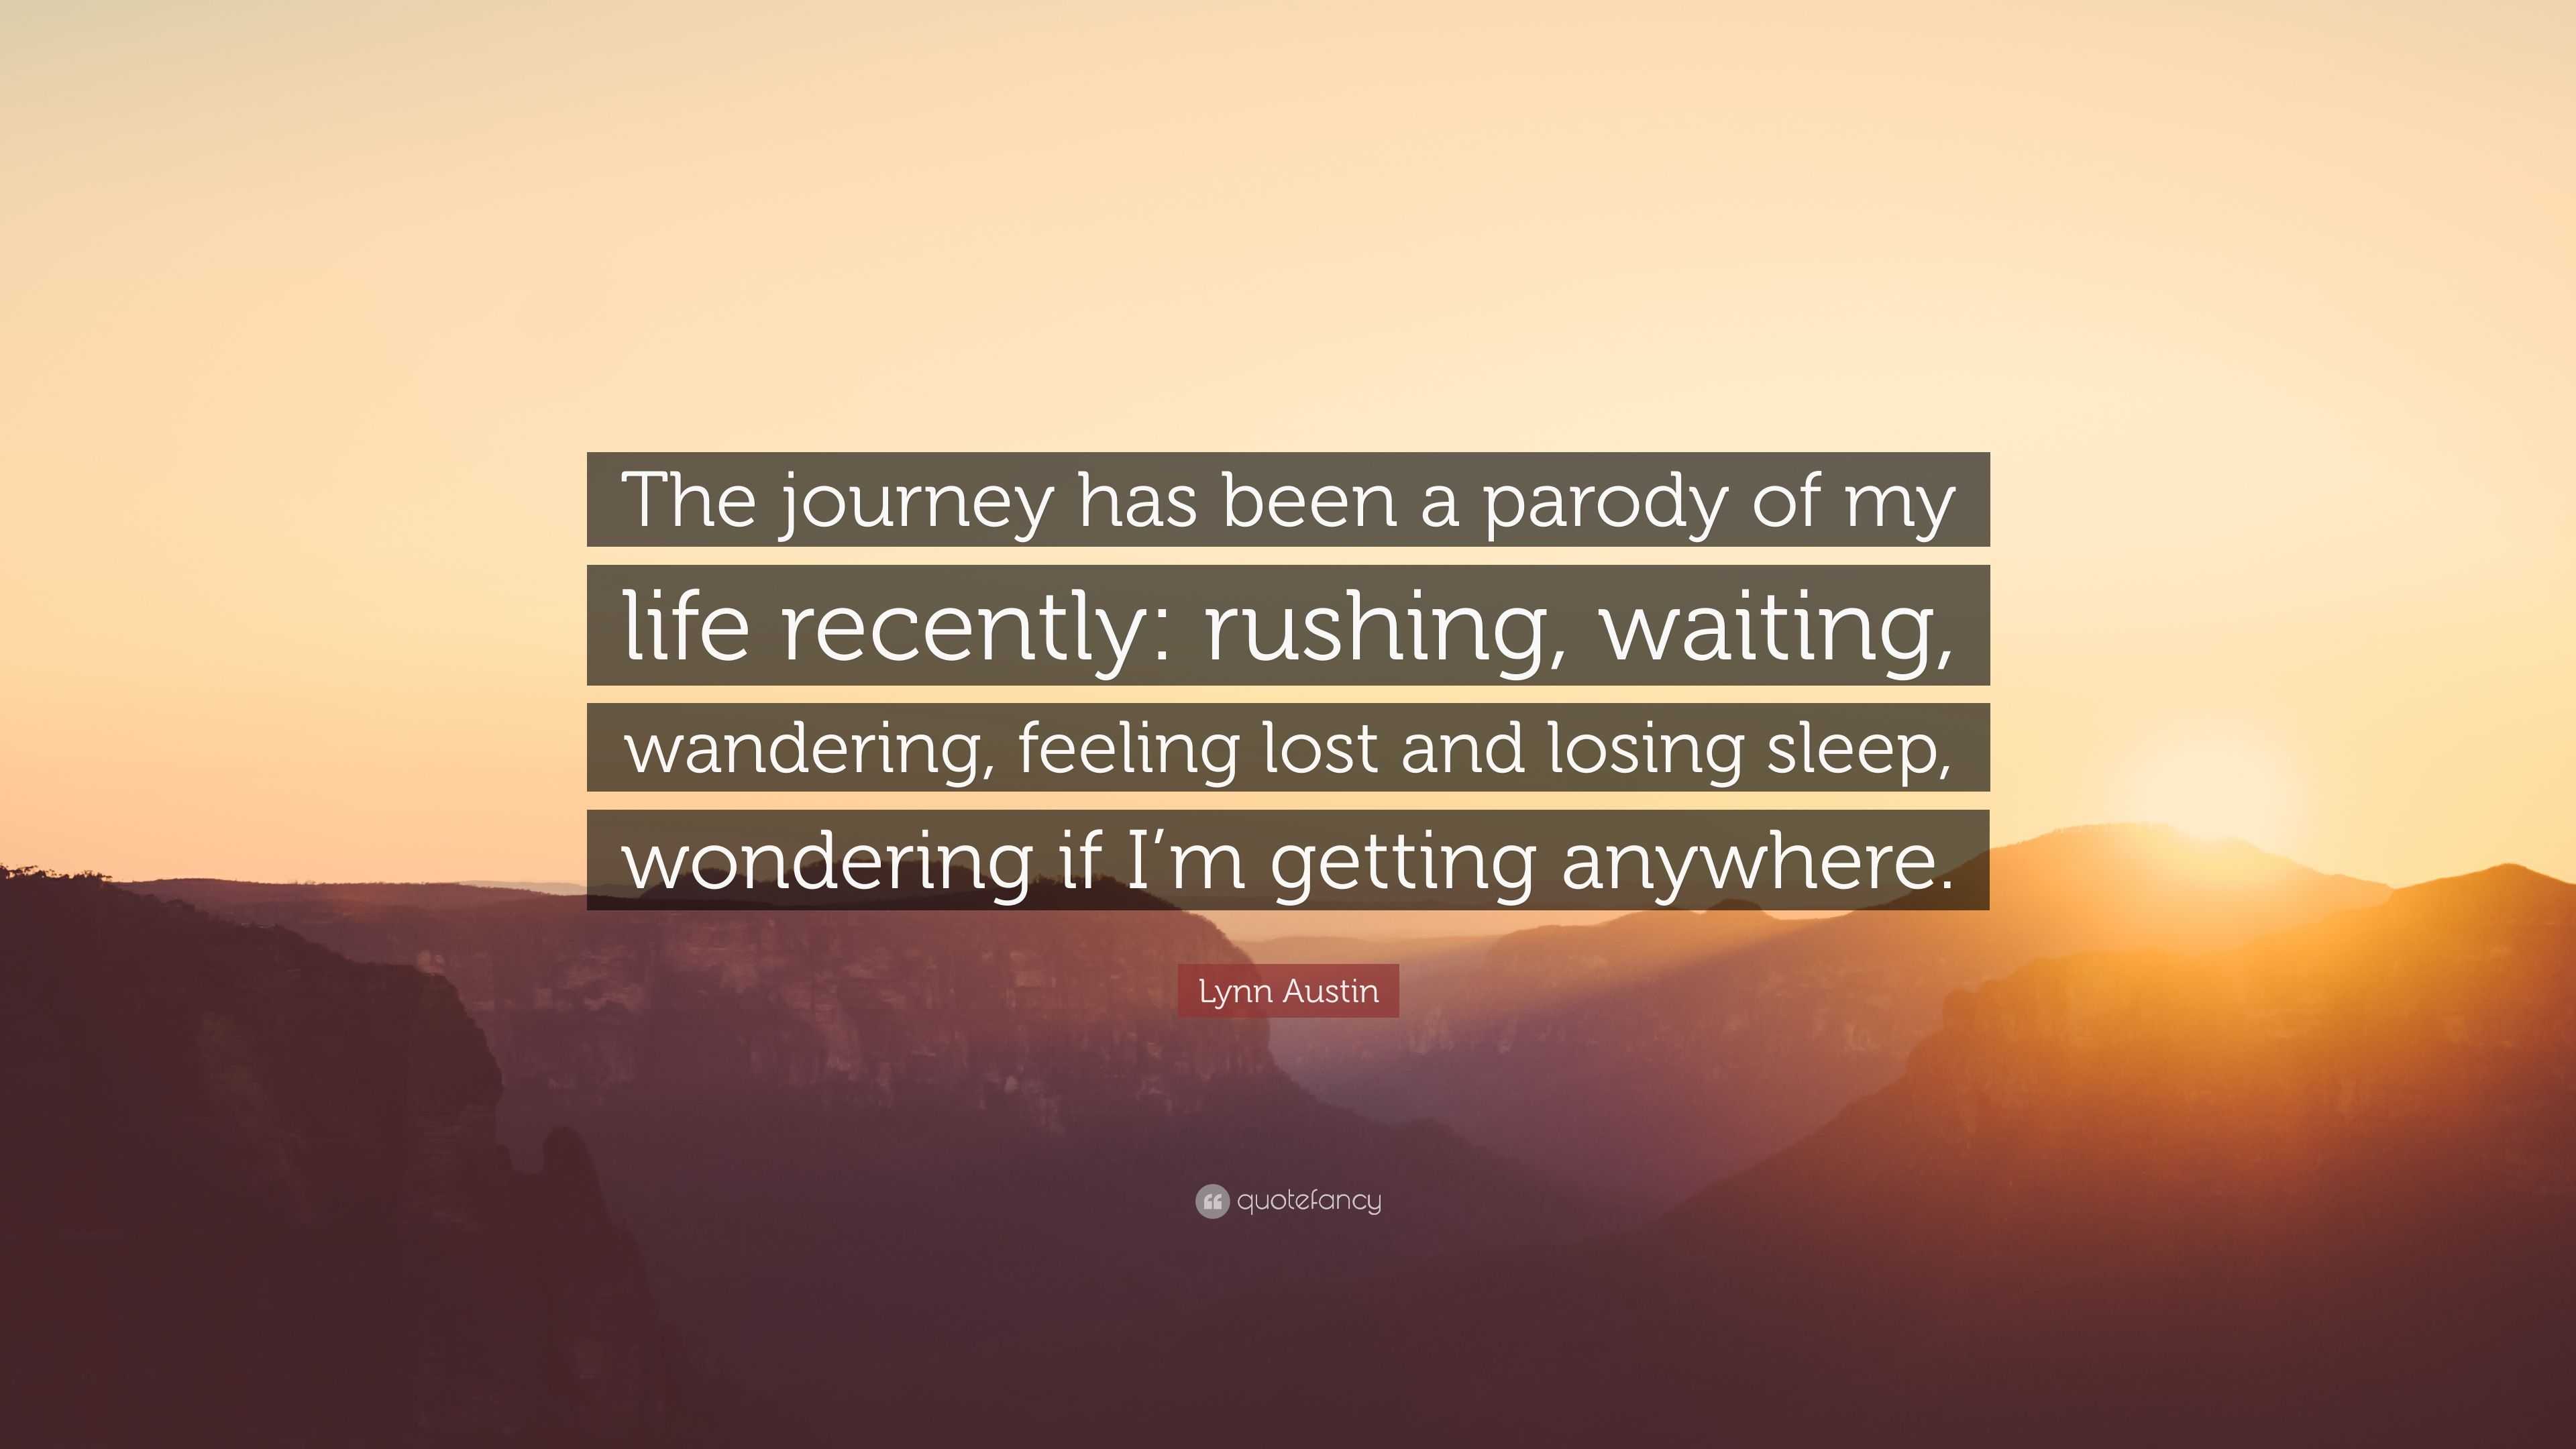 Lynn Austin Quote “The journey has been a parody of my life recently